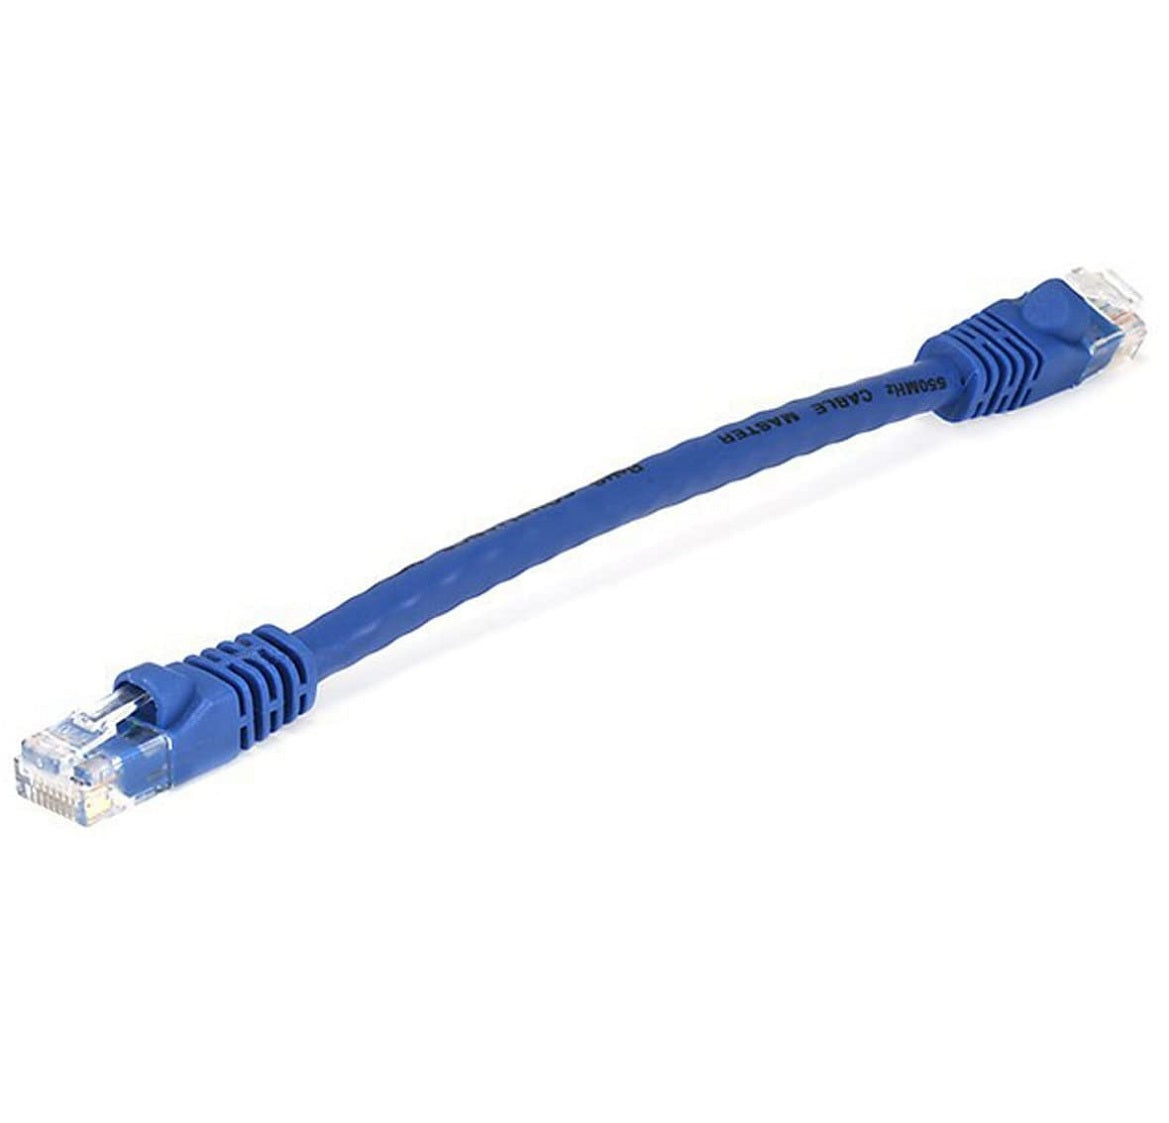 Monoprice Flexboot Cat5e Ethernet Patch Cable - Network Internet Cord - RJ45, Stranded, 350Mhz, UTP, Pure Bare Copper Wire, 24AWG, 0.5ft, Blue